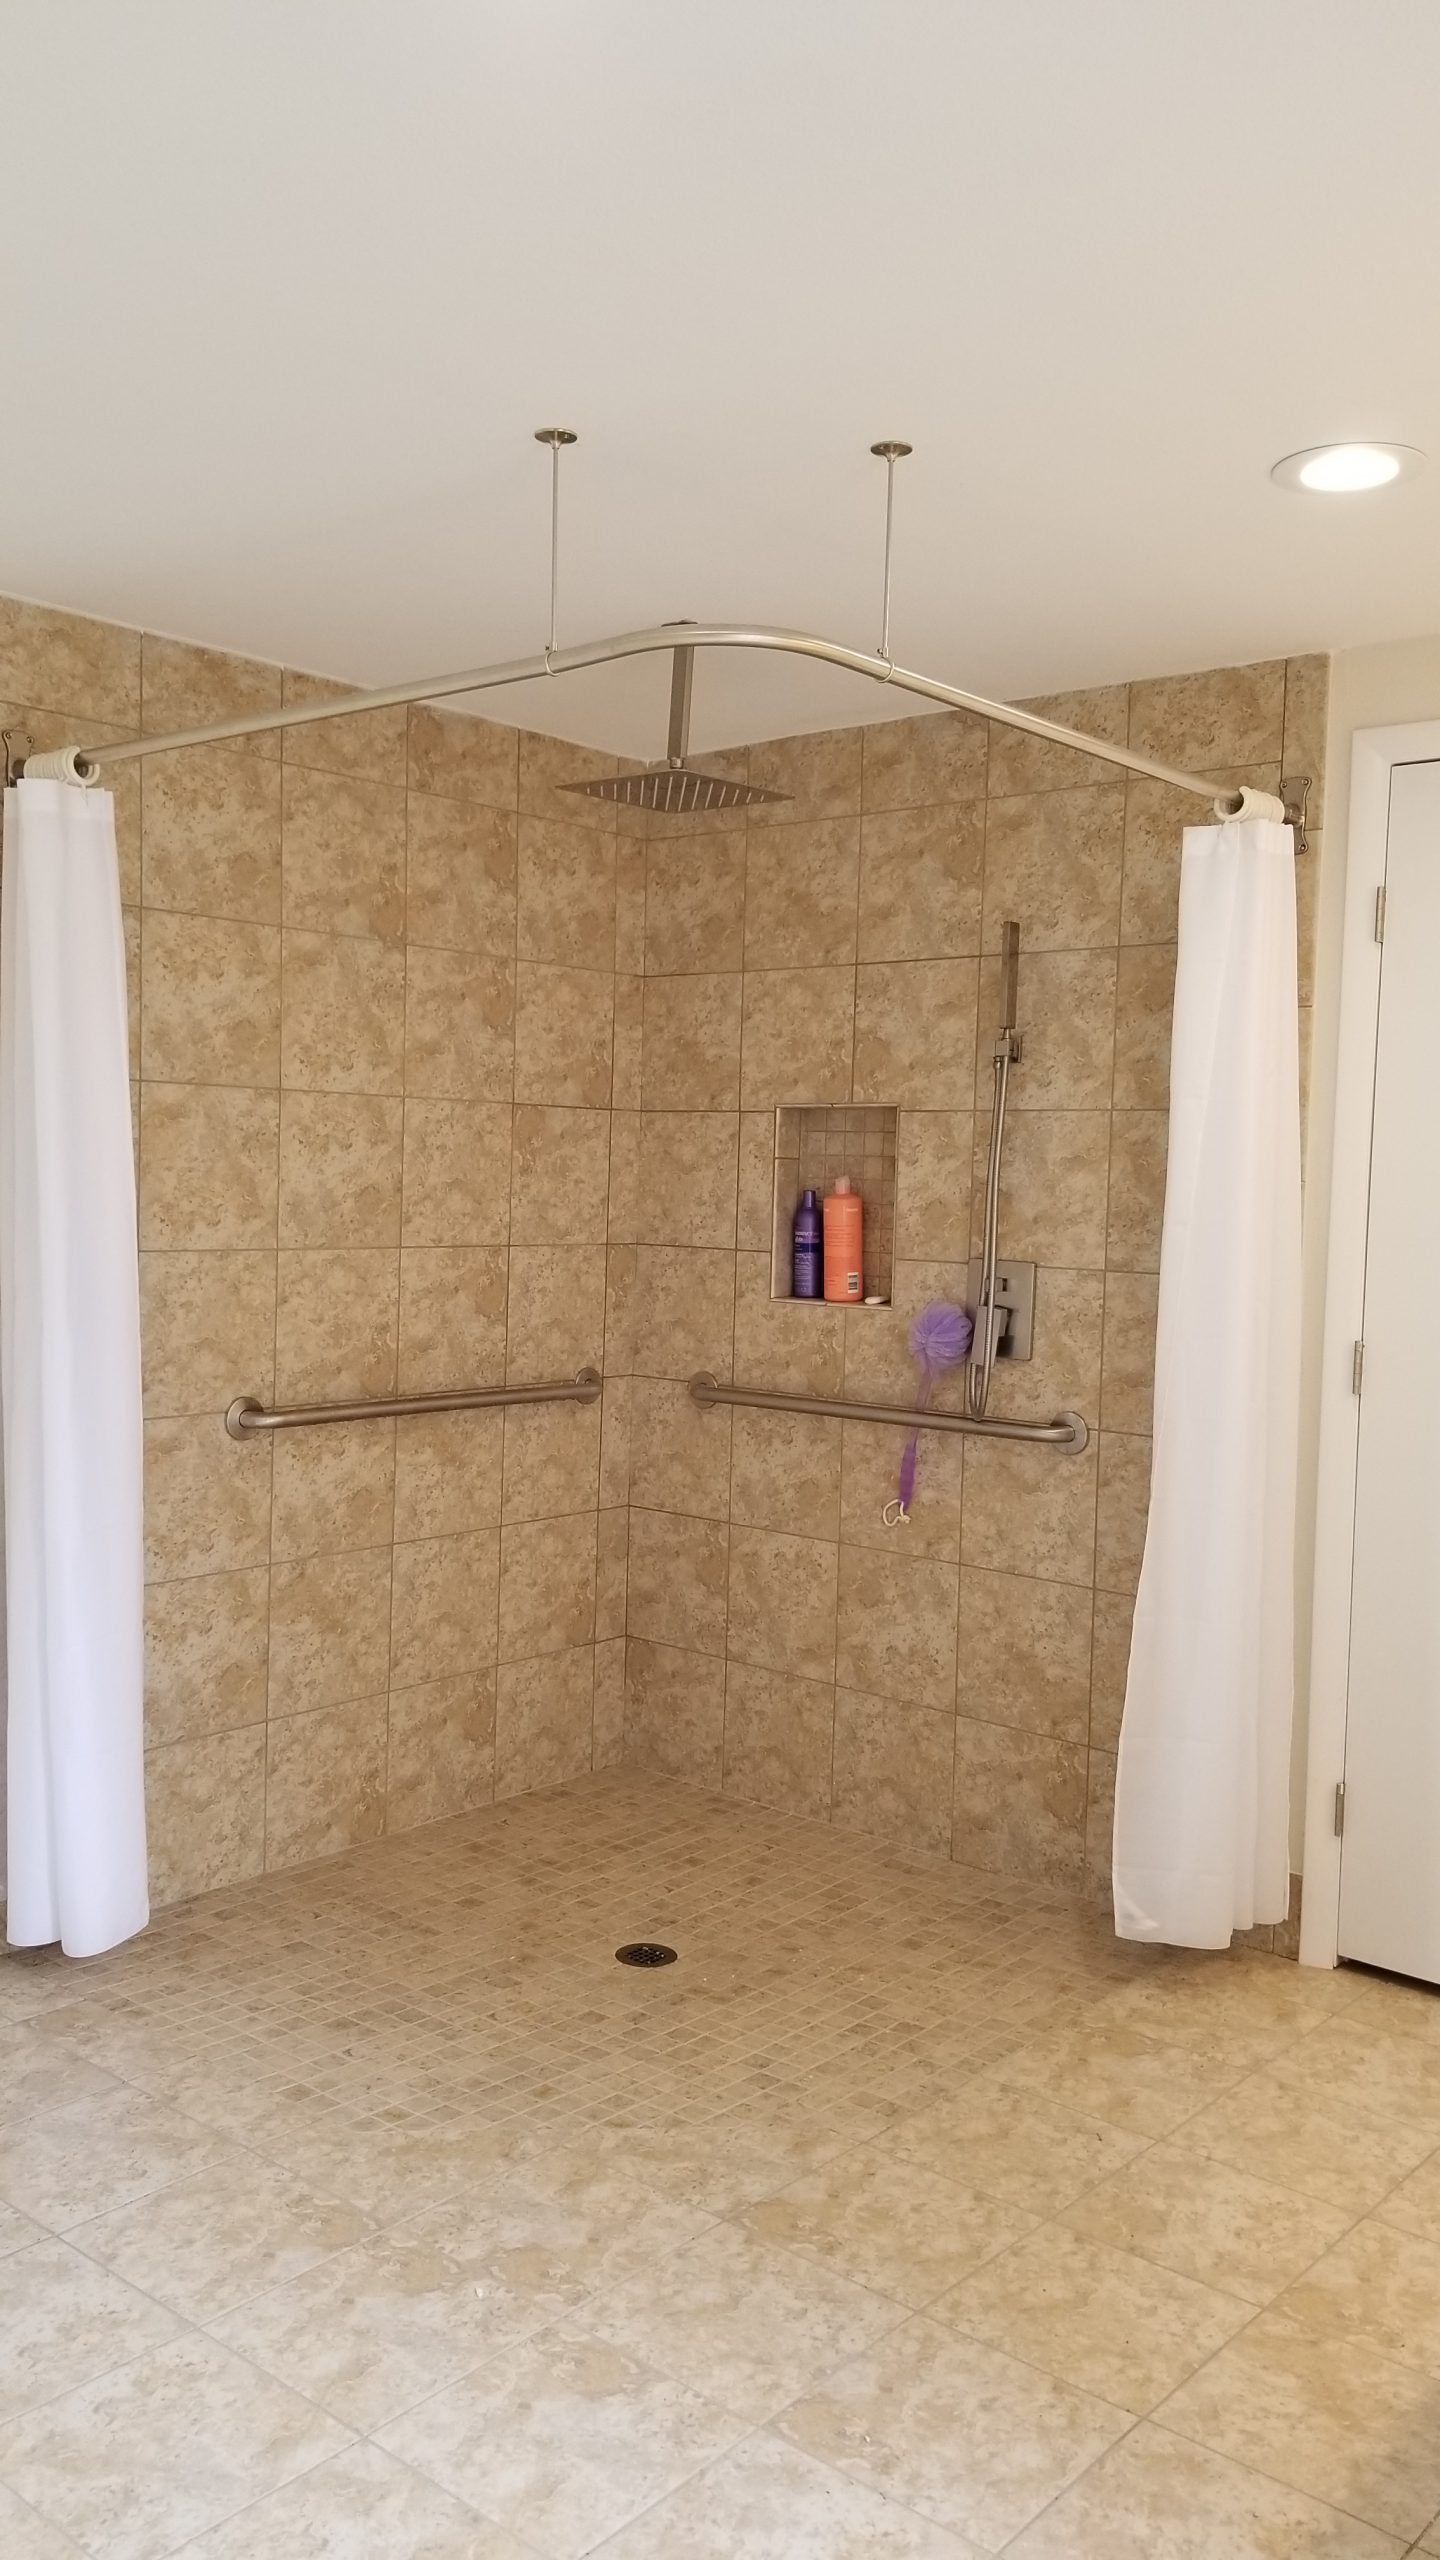 A bathroom with a grab bar installed in the shower